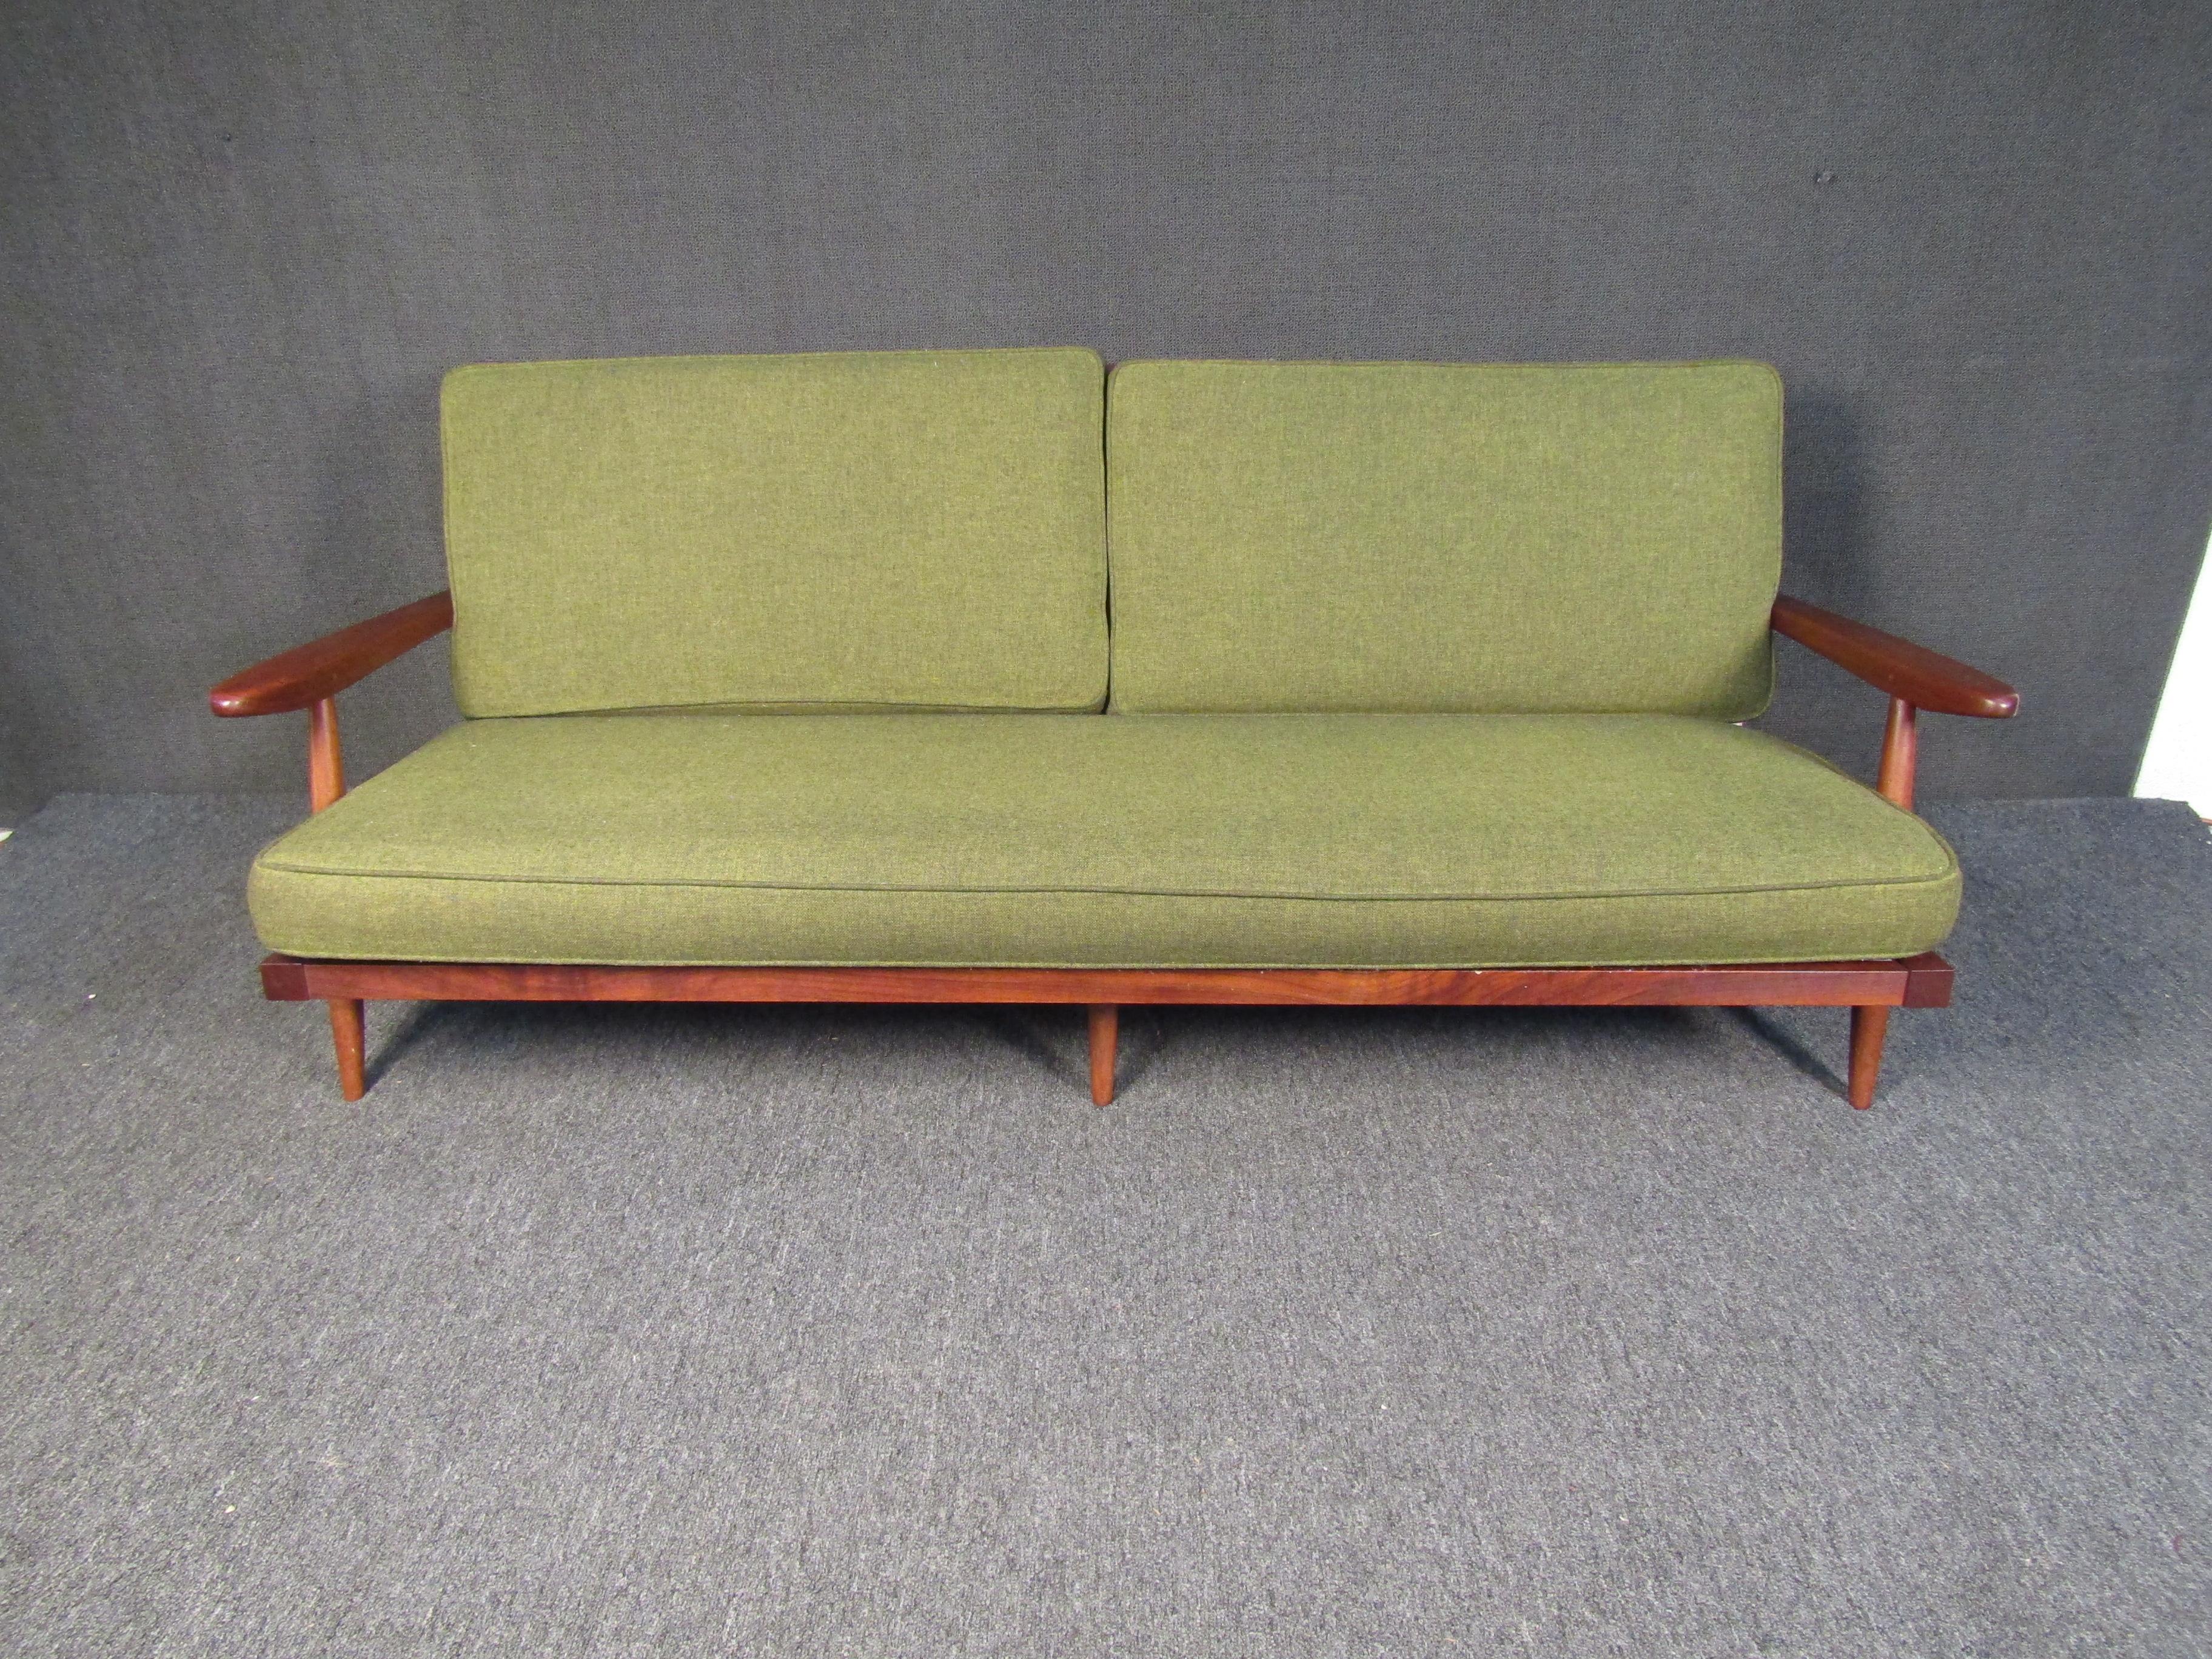 Original George Nakashima walnut sofa featuring an angled slat back, tapered legs, cushioned backrest and seat.
This item includes a letter of authentification from Nakashima Studios signed by Mira Nakashima.

Please confirm item location (NY or